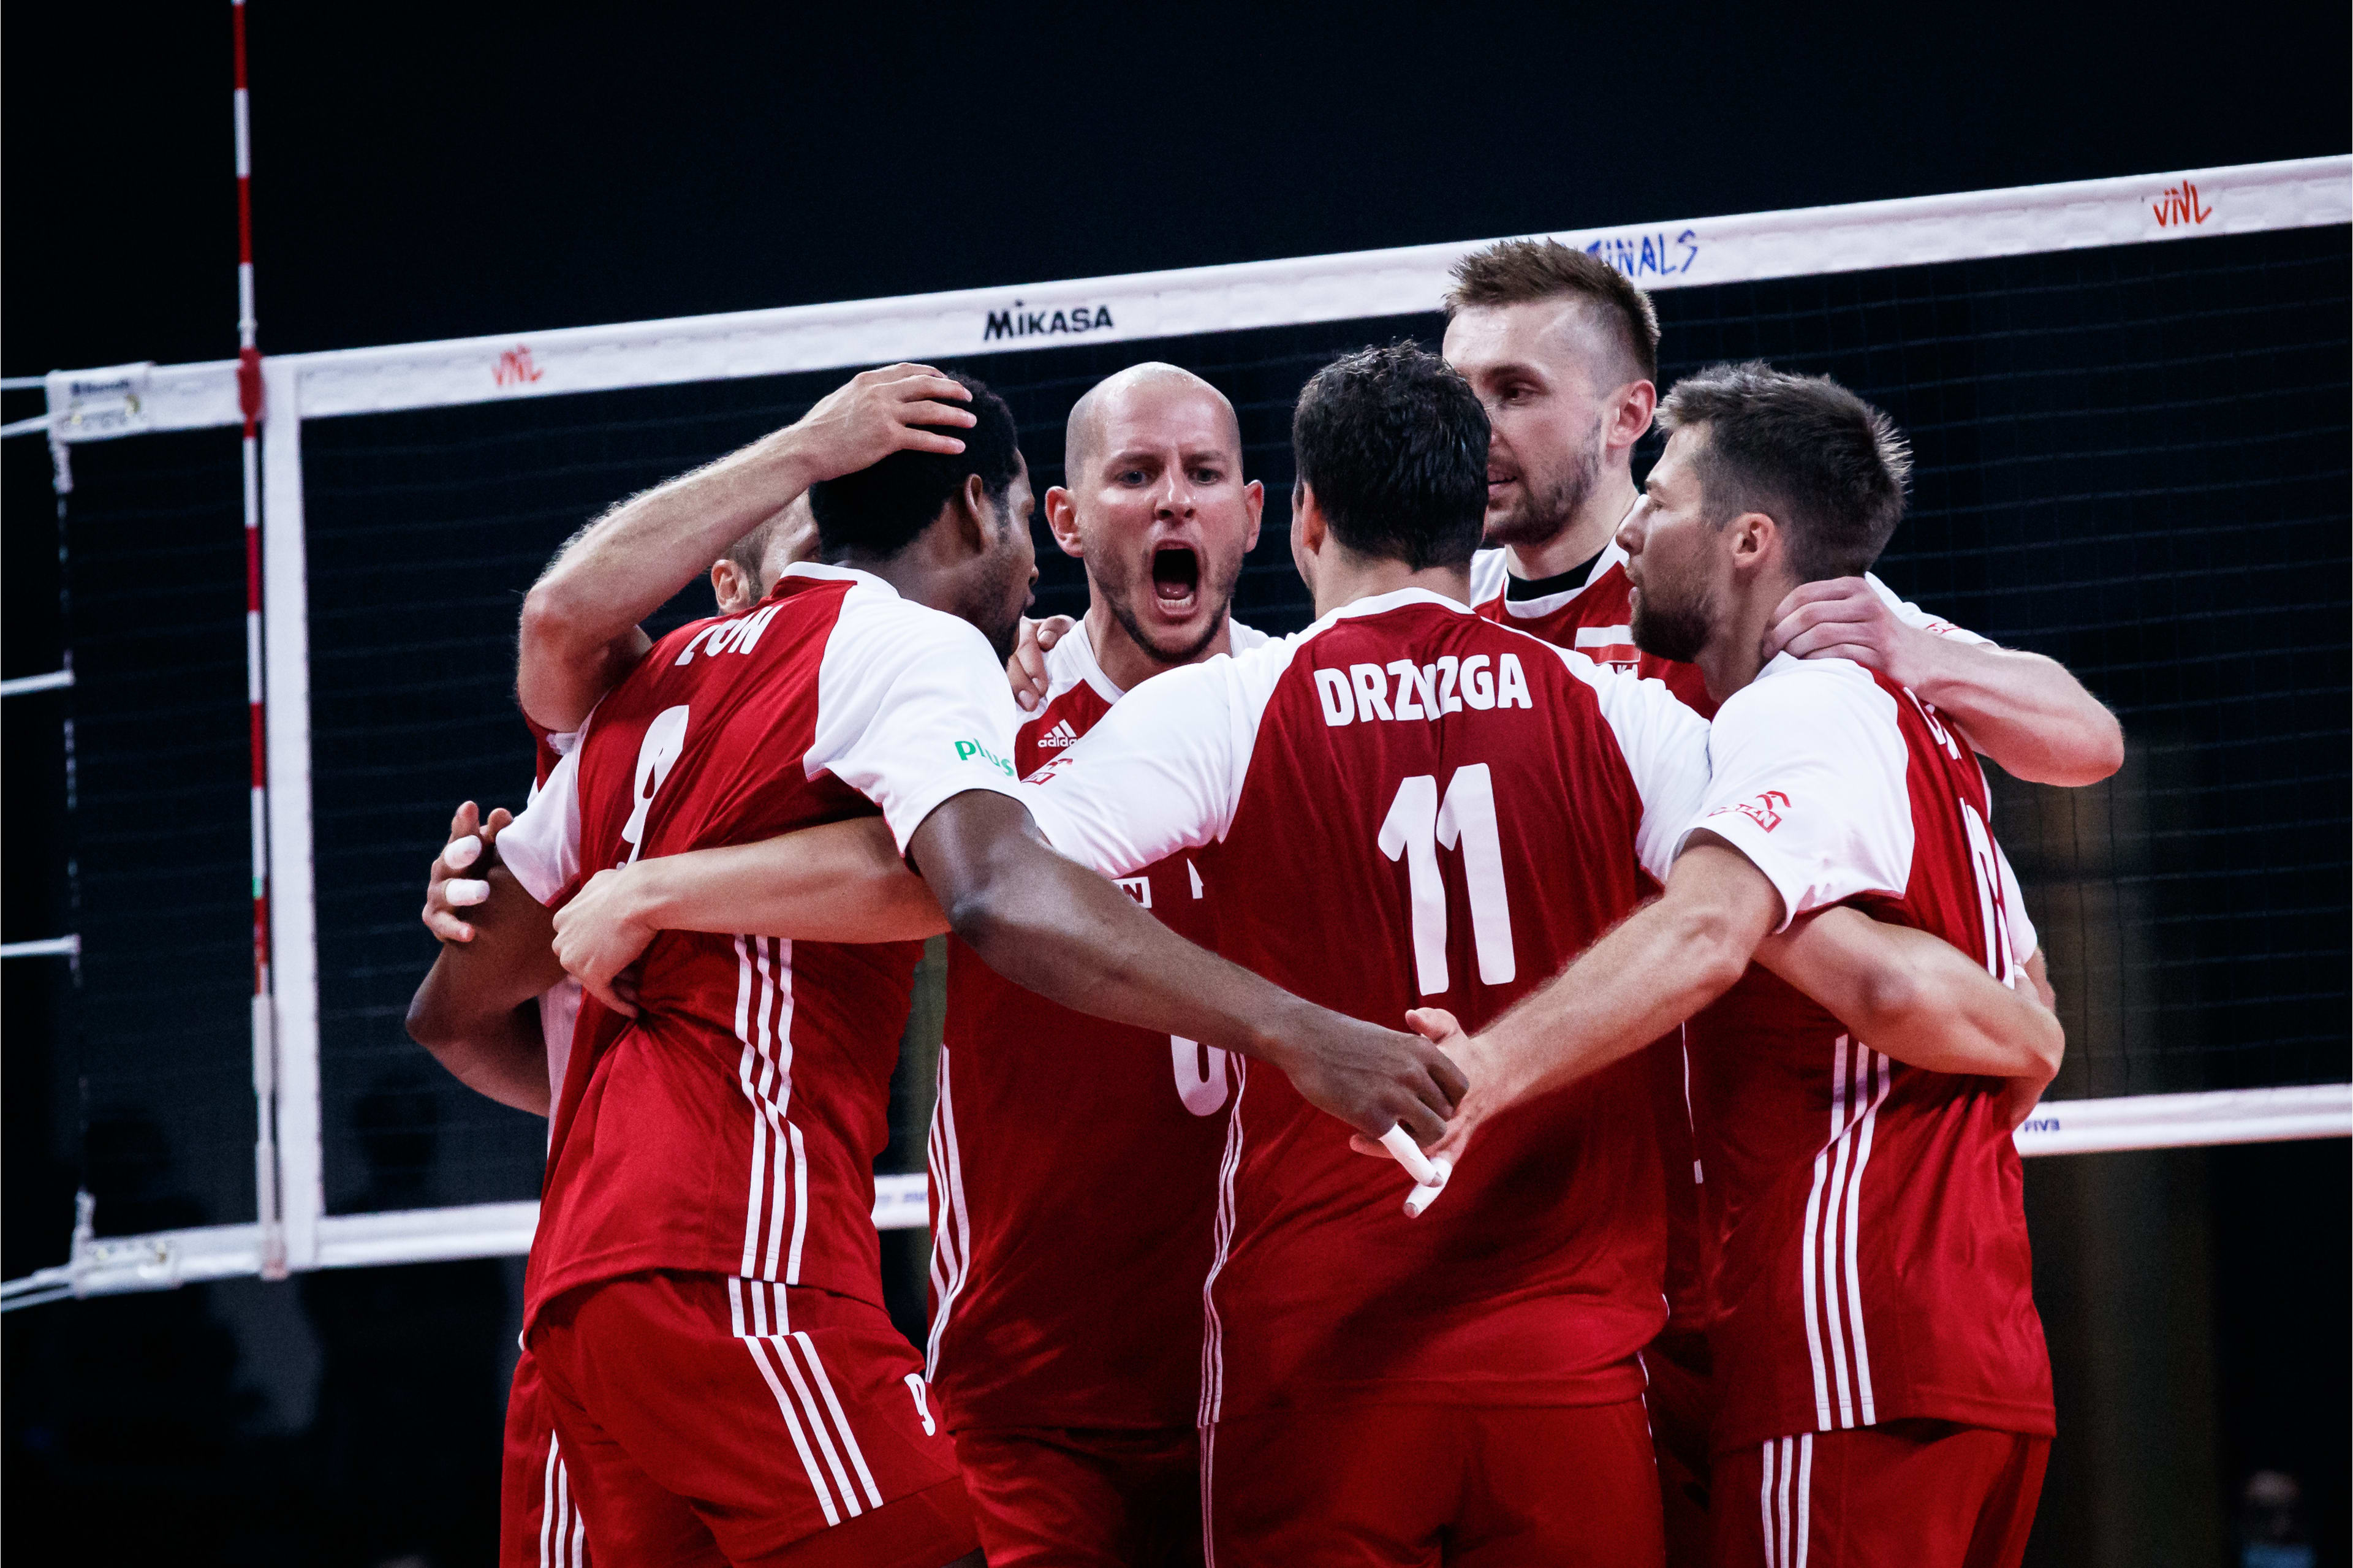 Poland and Bulgaria to host pools of the Volleyball Nations League 2022